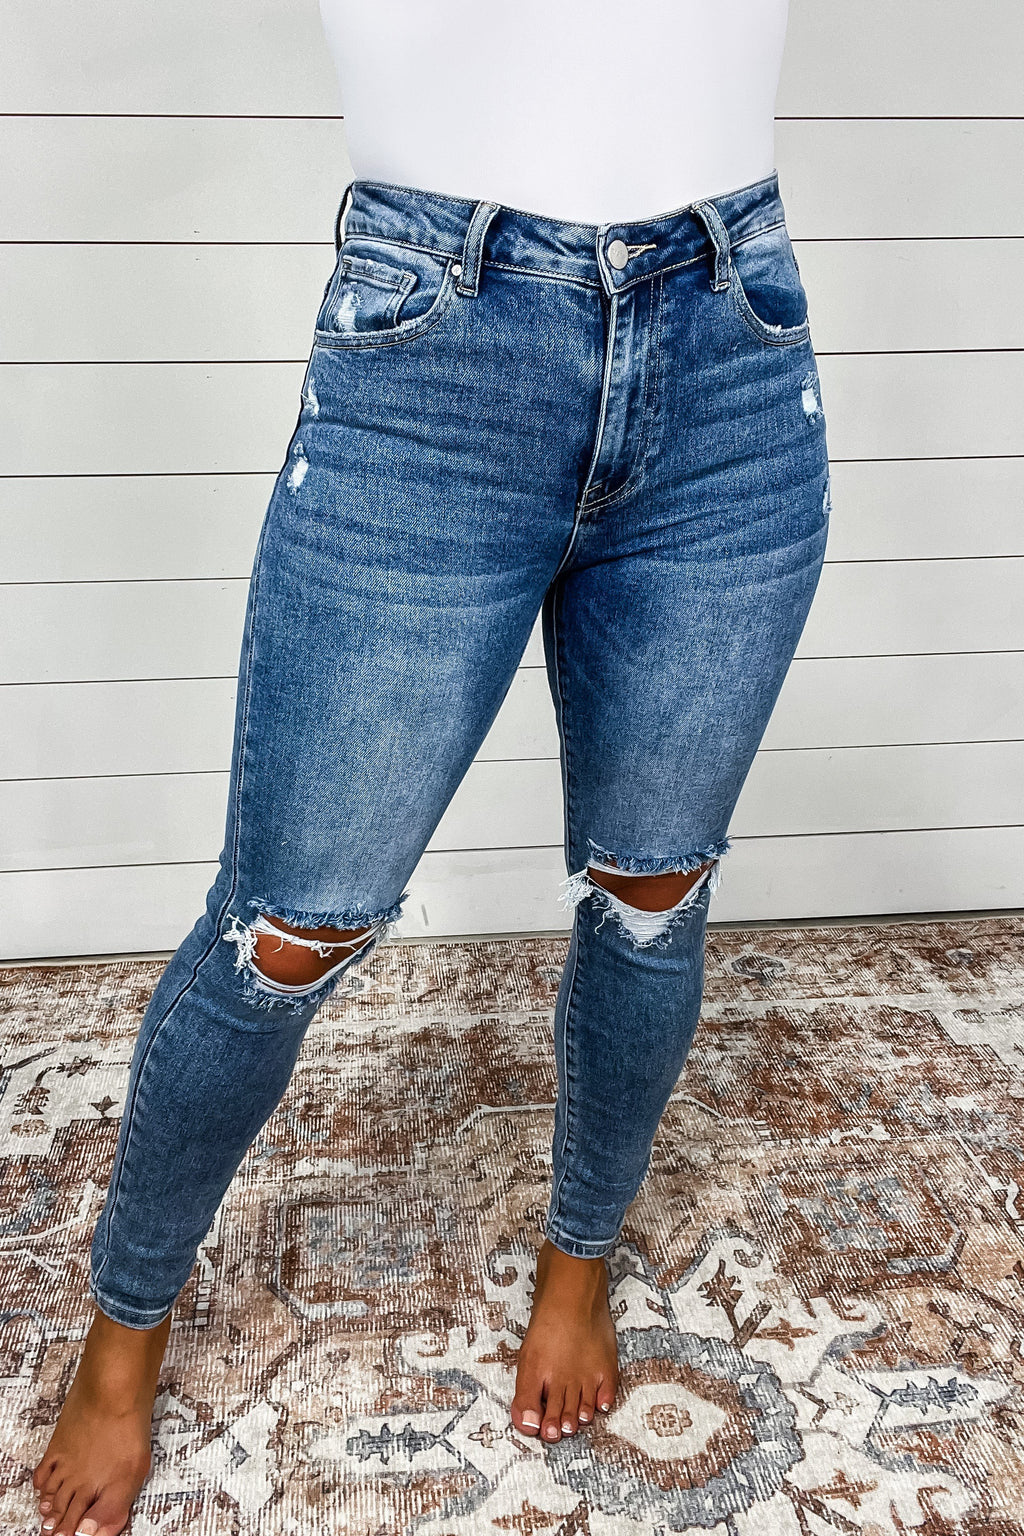 The Brooke's - High Rise Knee Distressed Skinny Jeans